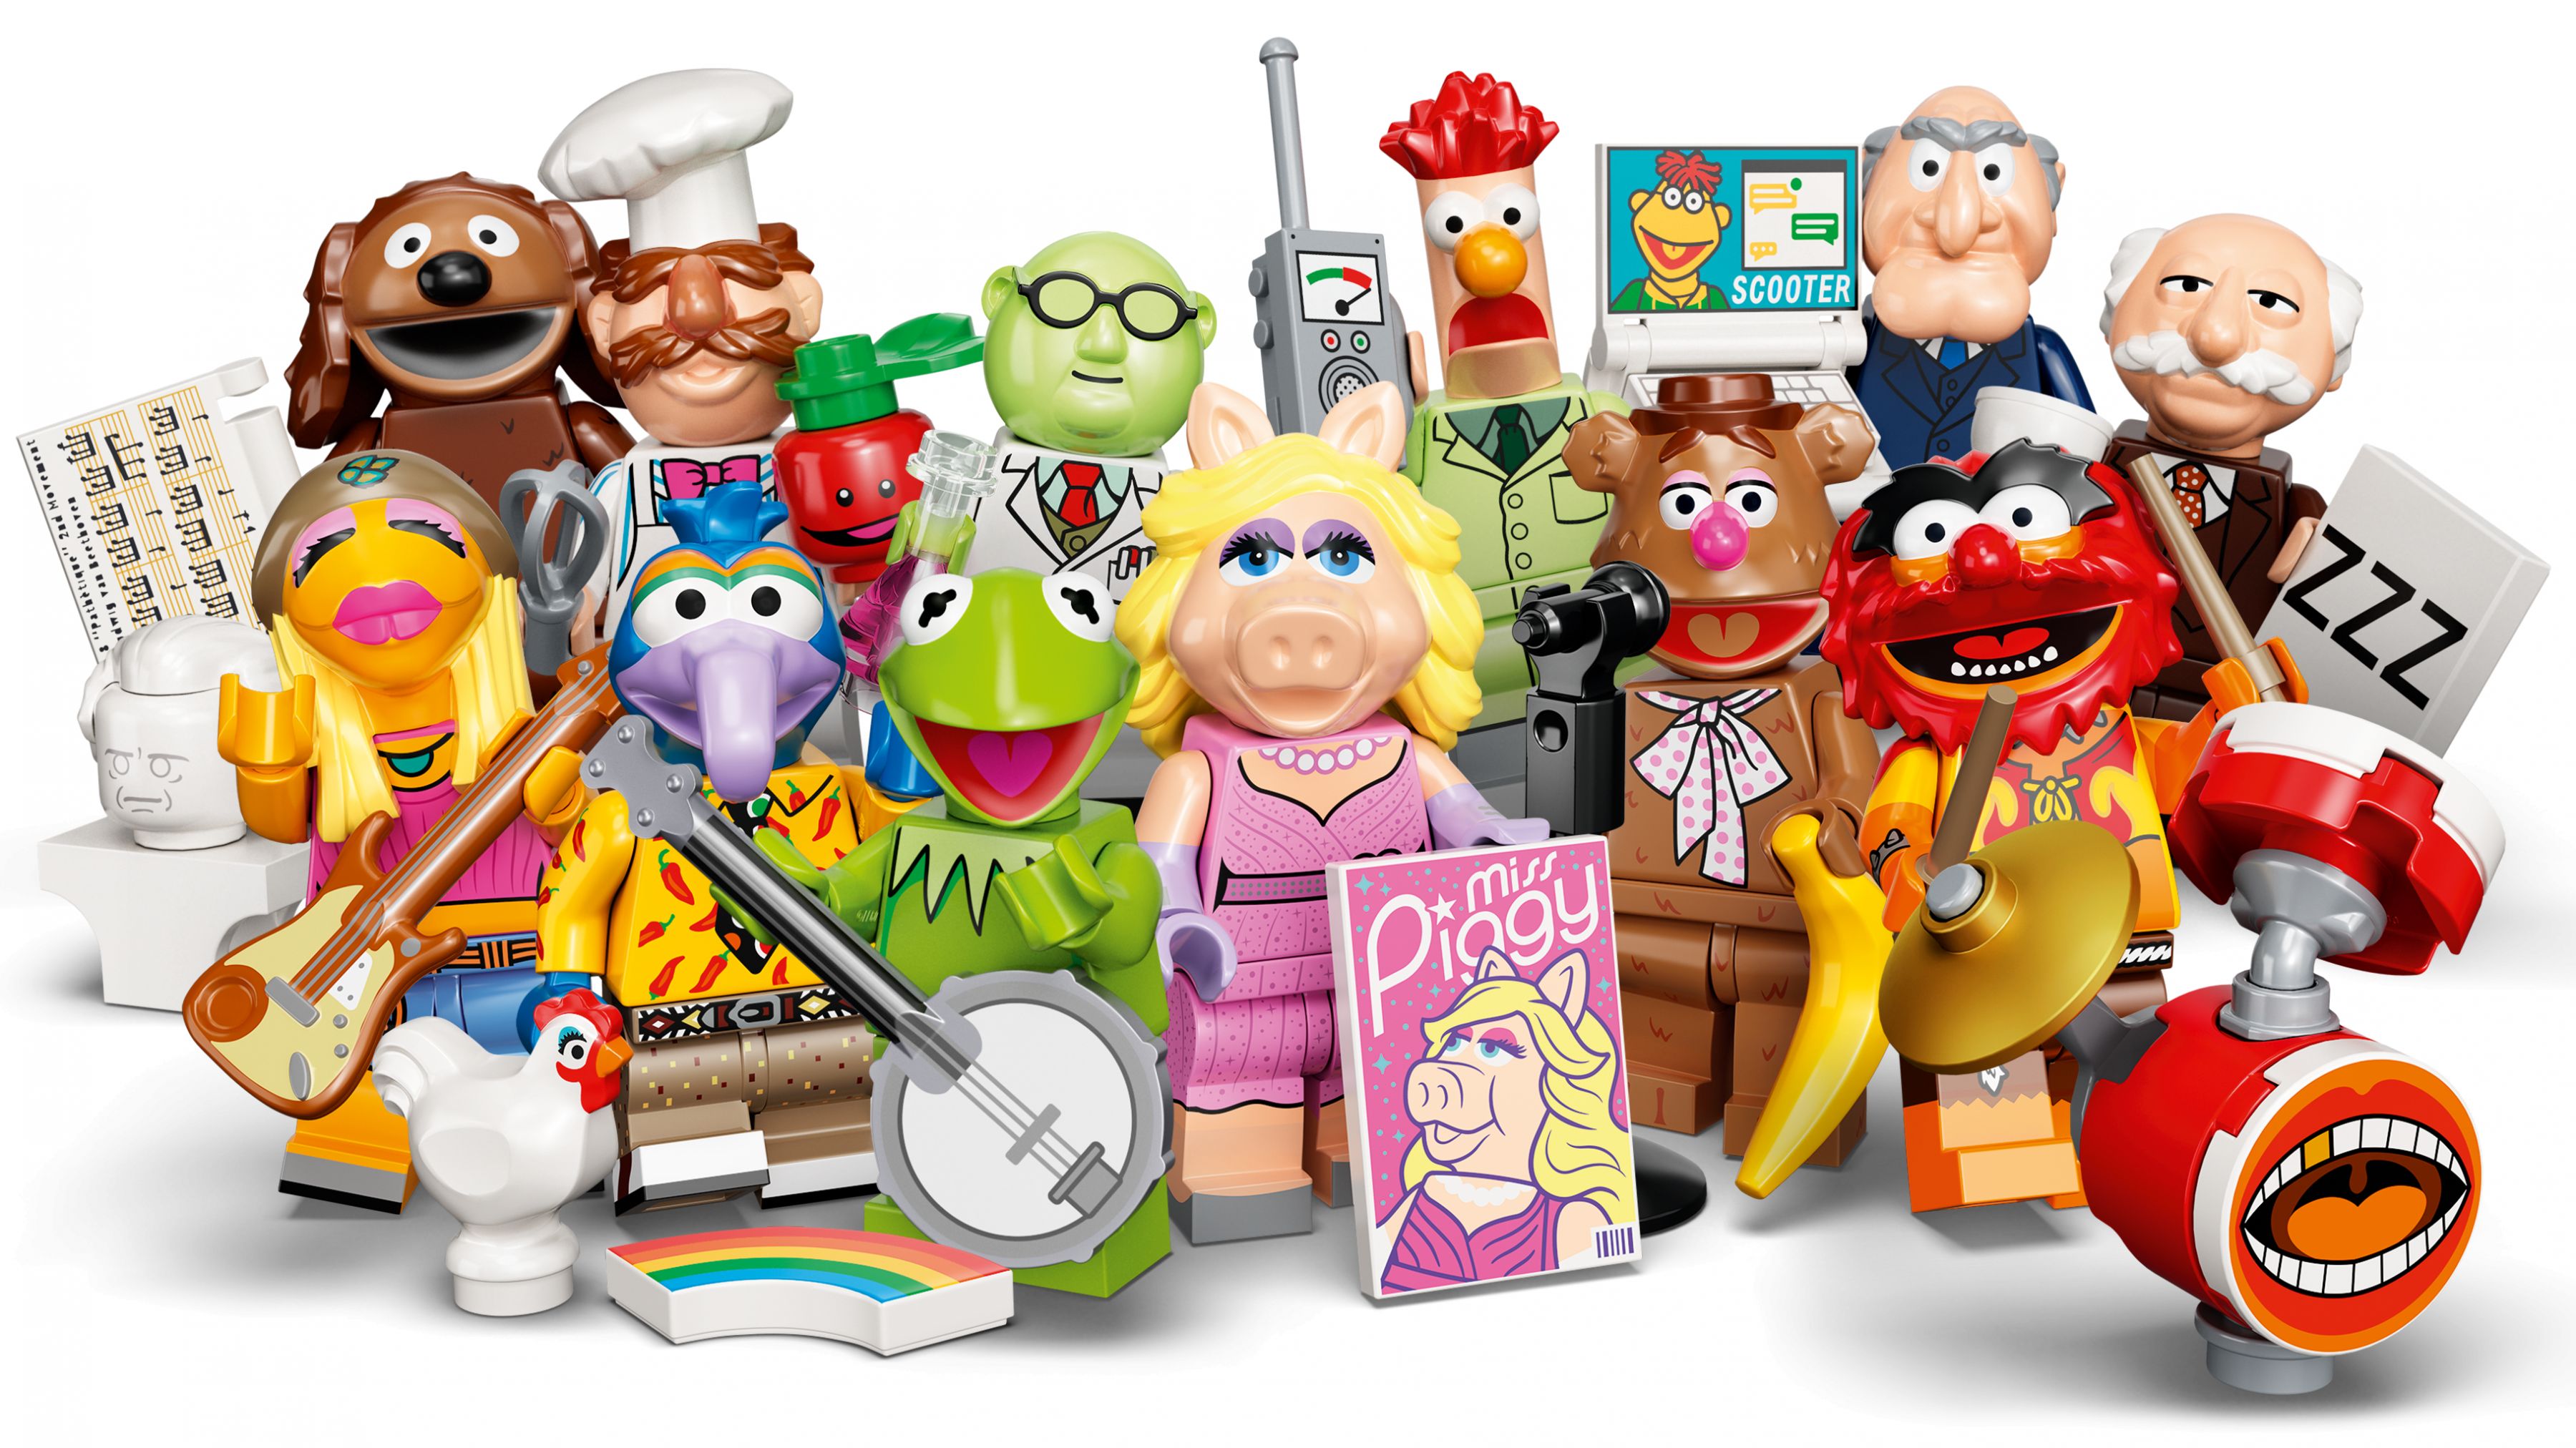 LEGO Collectable Minifigures 71033 Die Muppets LEGO_71033_71035_WEB_SEC06_NOBG.jpg